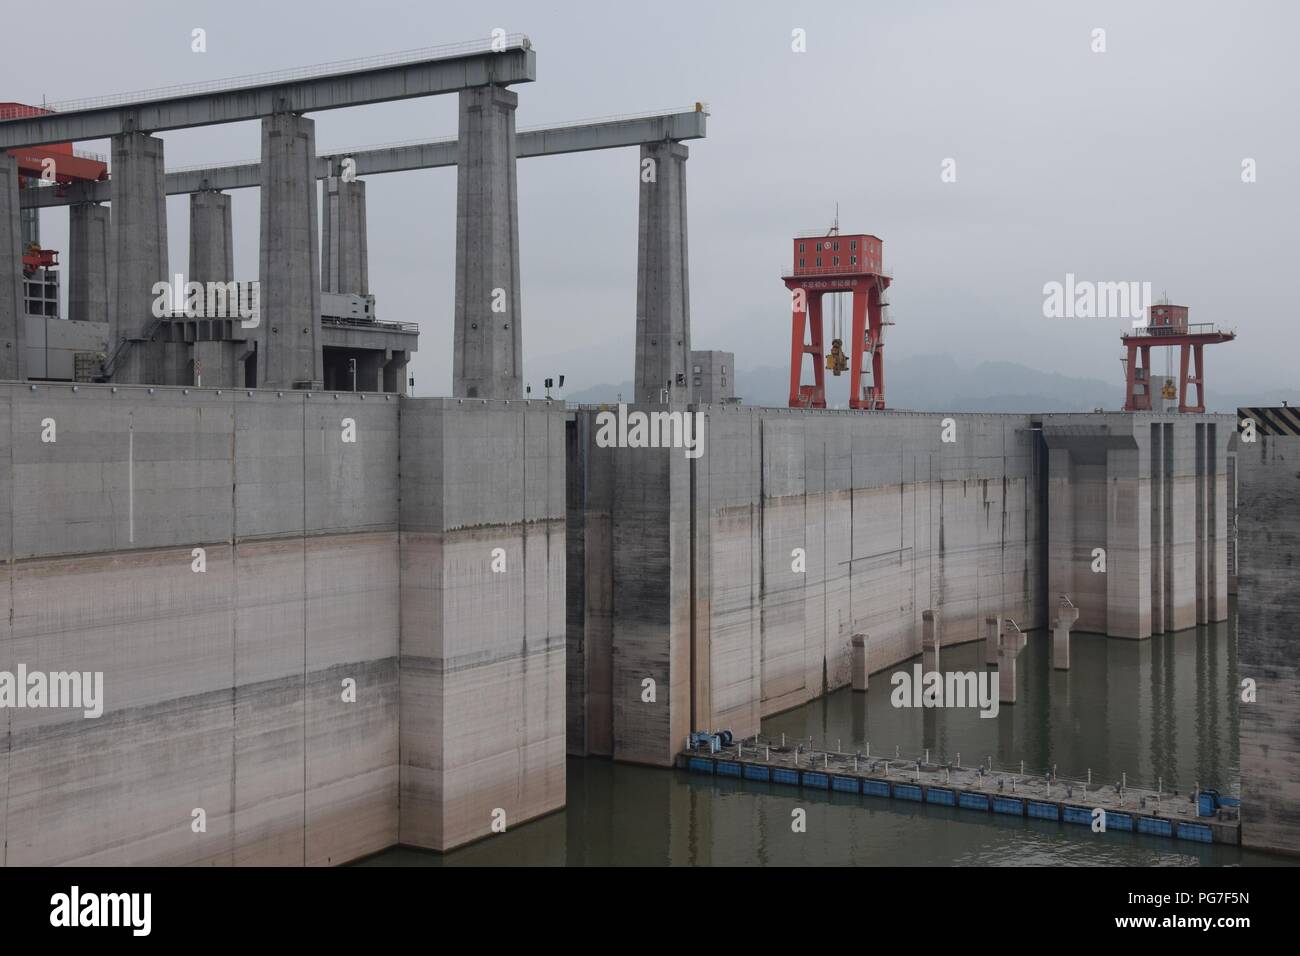 The Biggest Hydroelectric Power Station in the World - Three Gorges Dam on  Yangtze river in China Stock Photo - Alamy